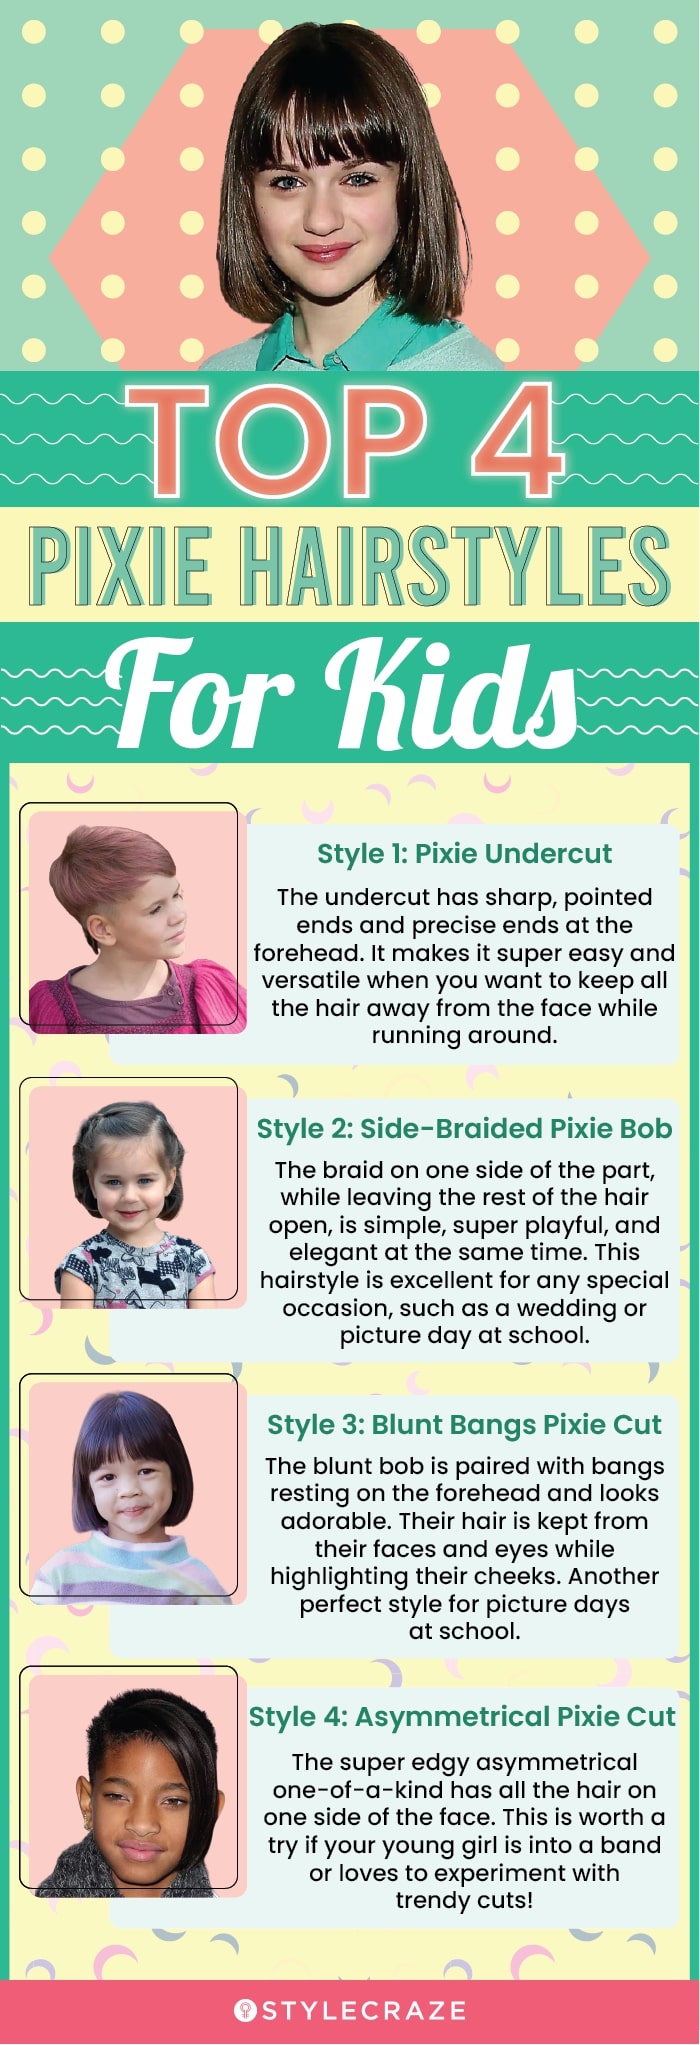 top 4 pixie hairstyles for kids (infographic)